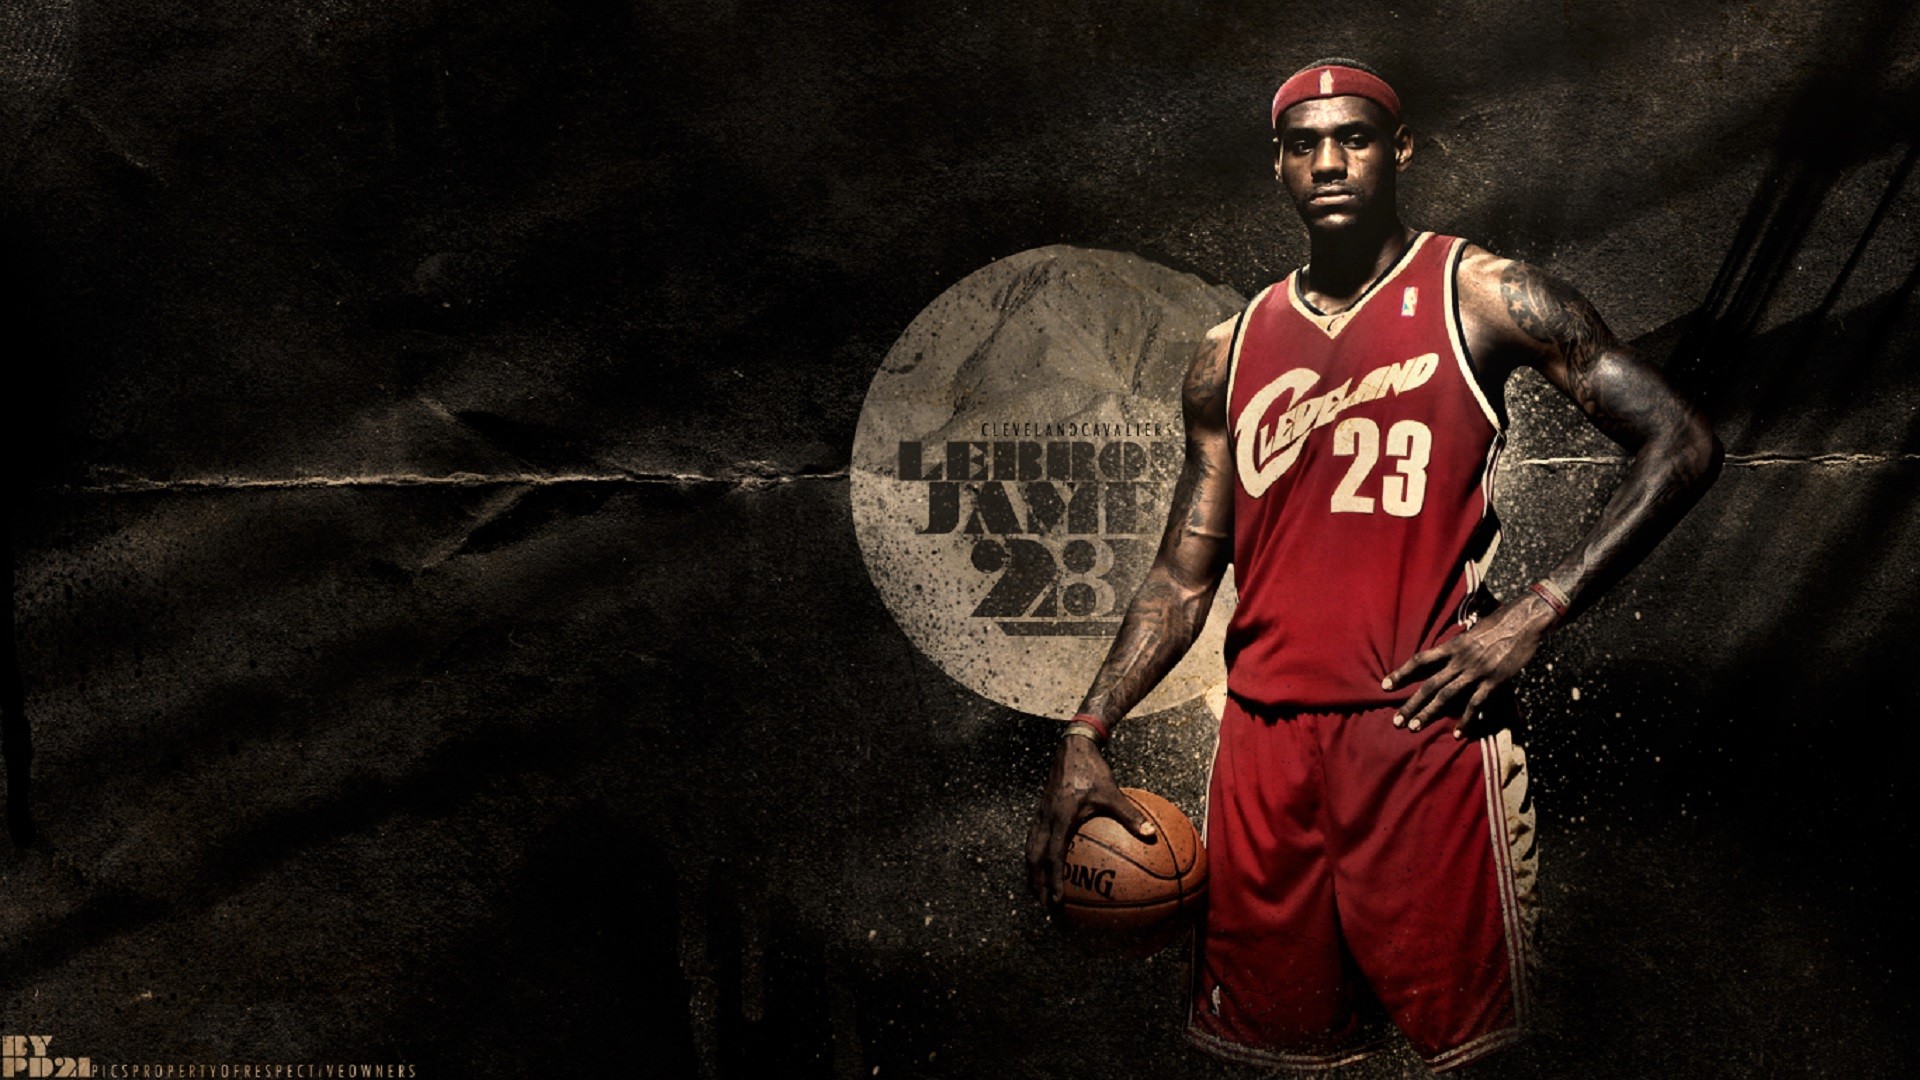 1920x1080  48+ LeBron James wallpapers HD free Download